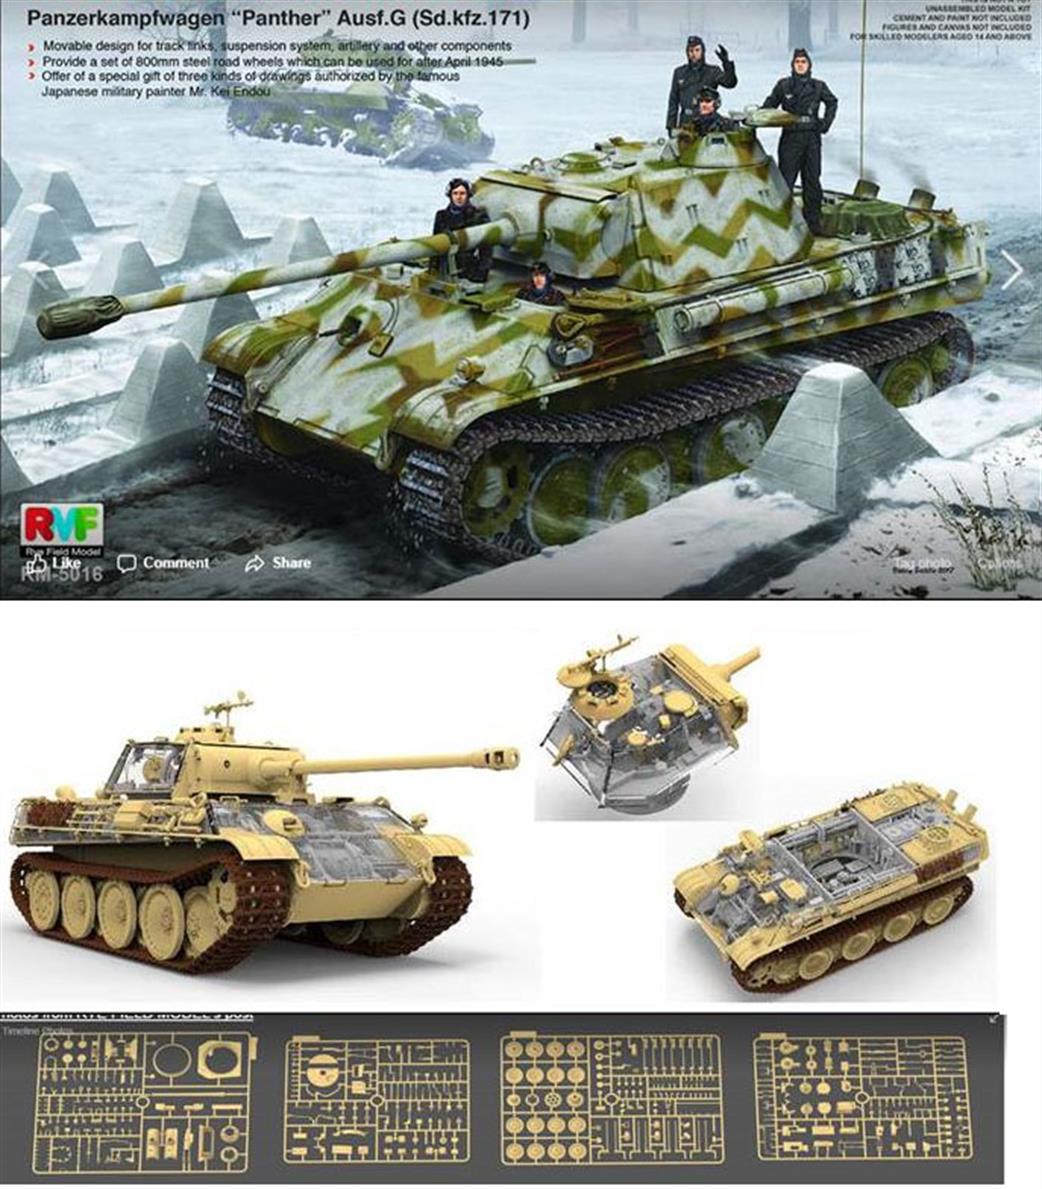 Rye Field Model RM-5016 Panther Ausf.G with Full Interior Tank Kit 1/35